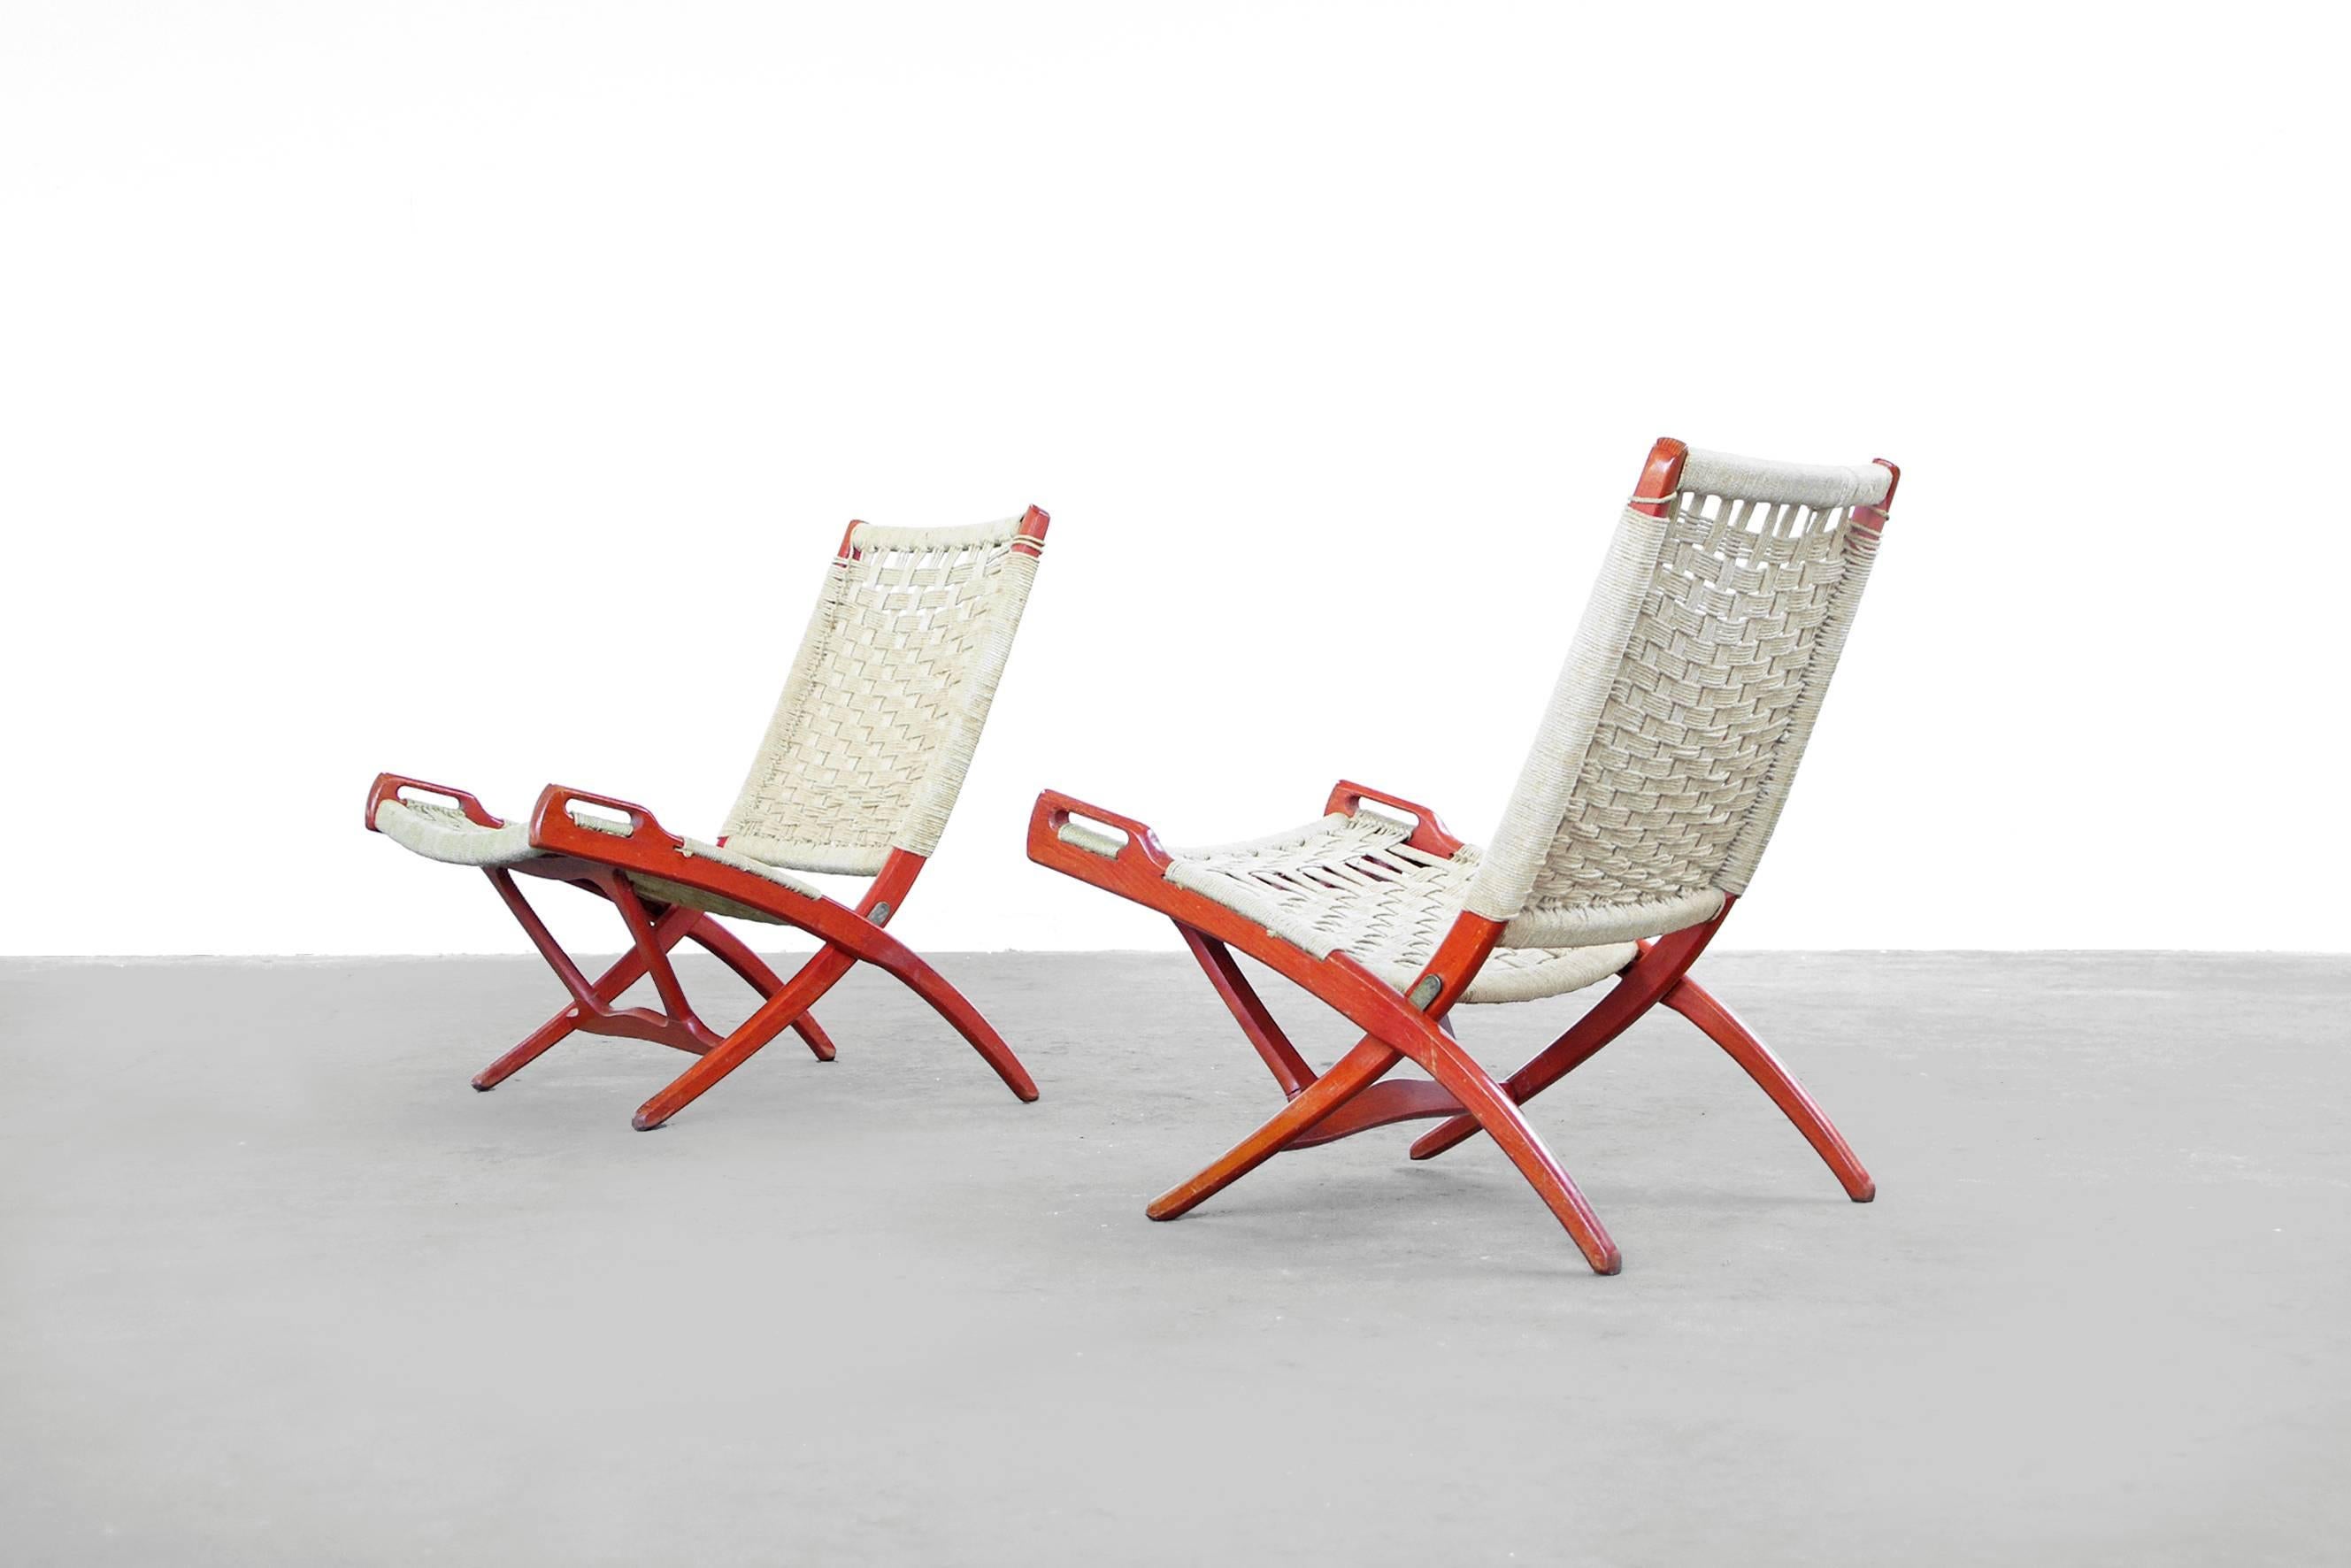 Beautiful folding chairs designed by Ebert Wels, England 1960.
They are very comfortable to sit thanks to the elastic of the rope.
The frame is out of red stained wood with beautiful details, such as the nice formed handles.
Overall in a good